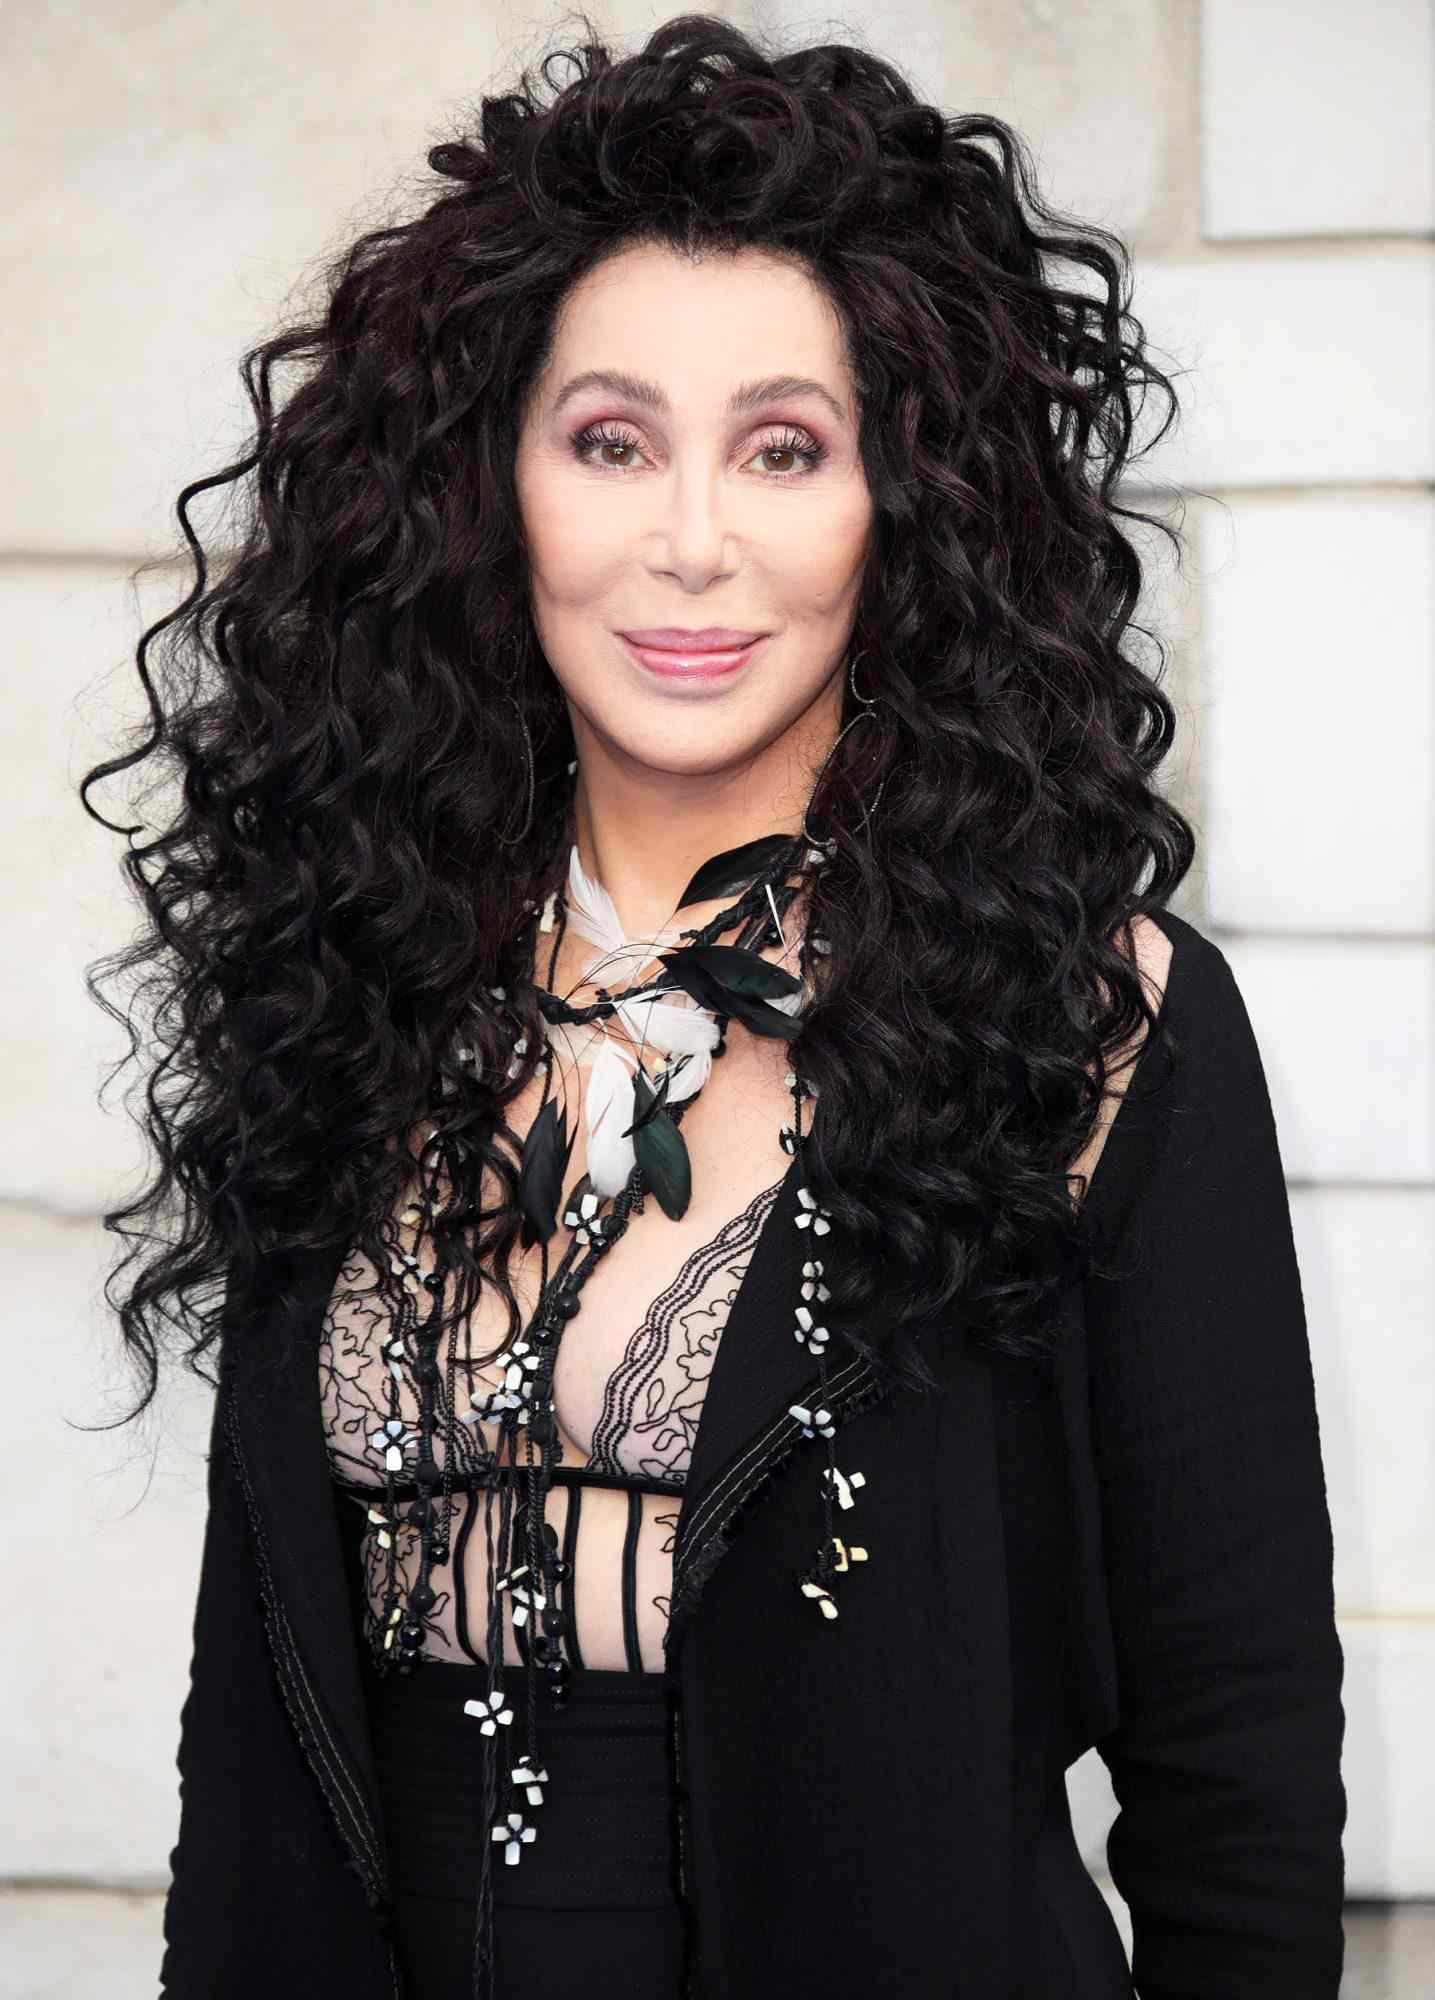 Cher Talks A-List Love Life While Revealing She's 'Still on the Lookout'  for a Man | PEOPLE.com